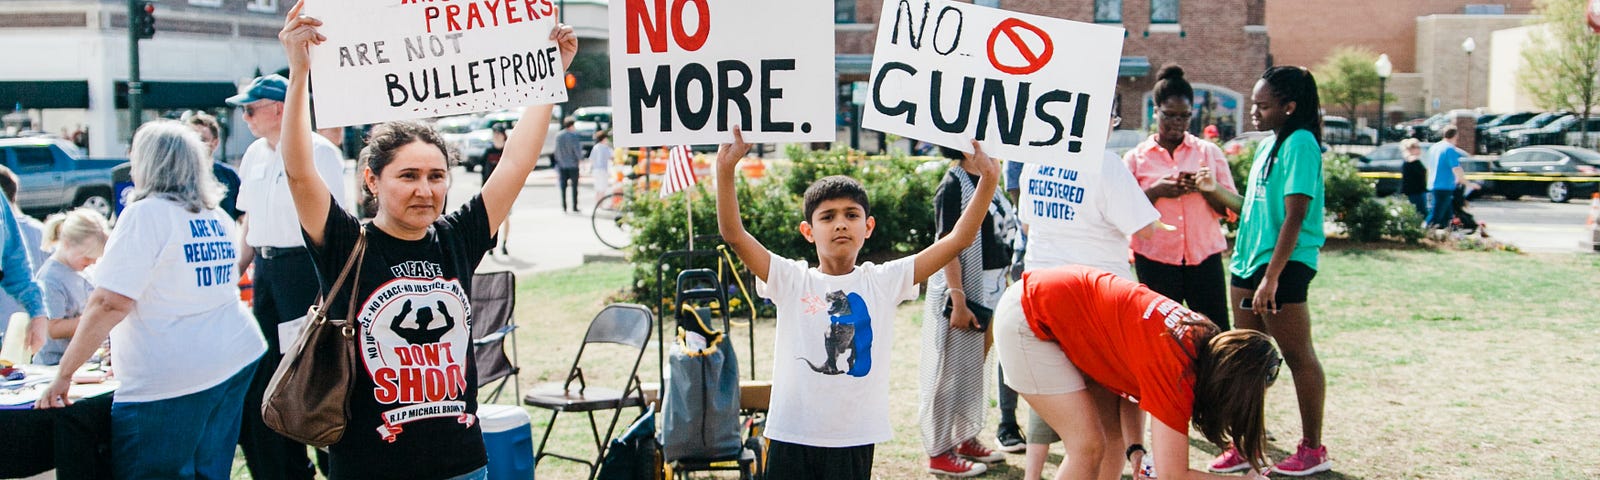 School kids and parents hold protest signs in favor of gun control. Photo by Heather Mount on Unsplash